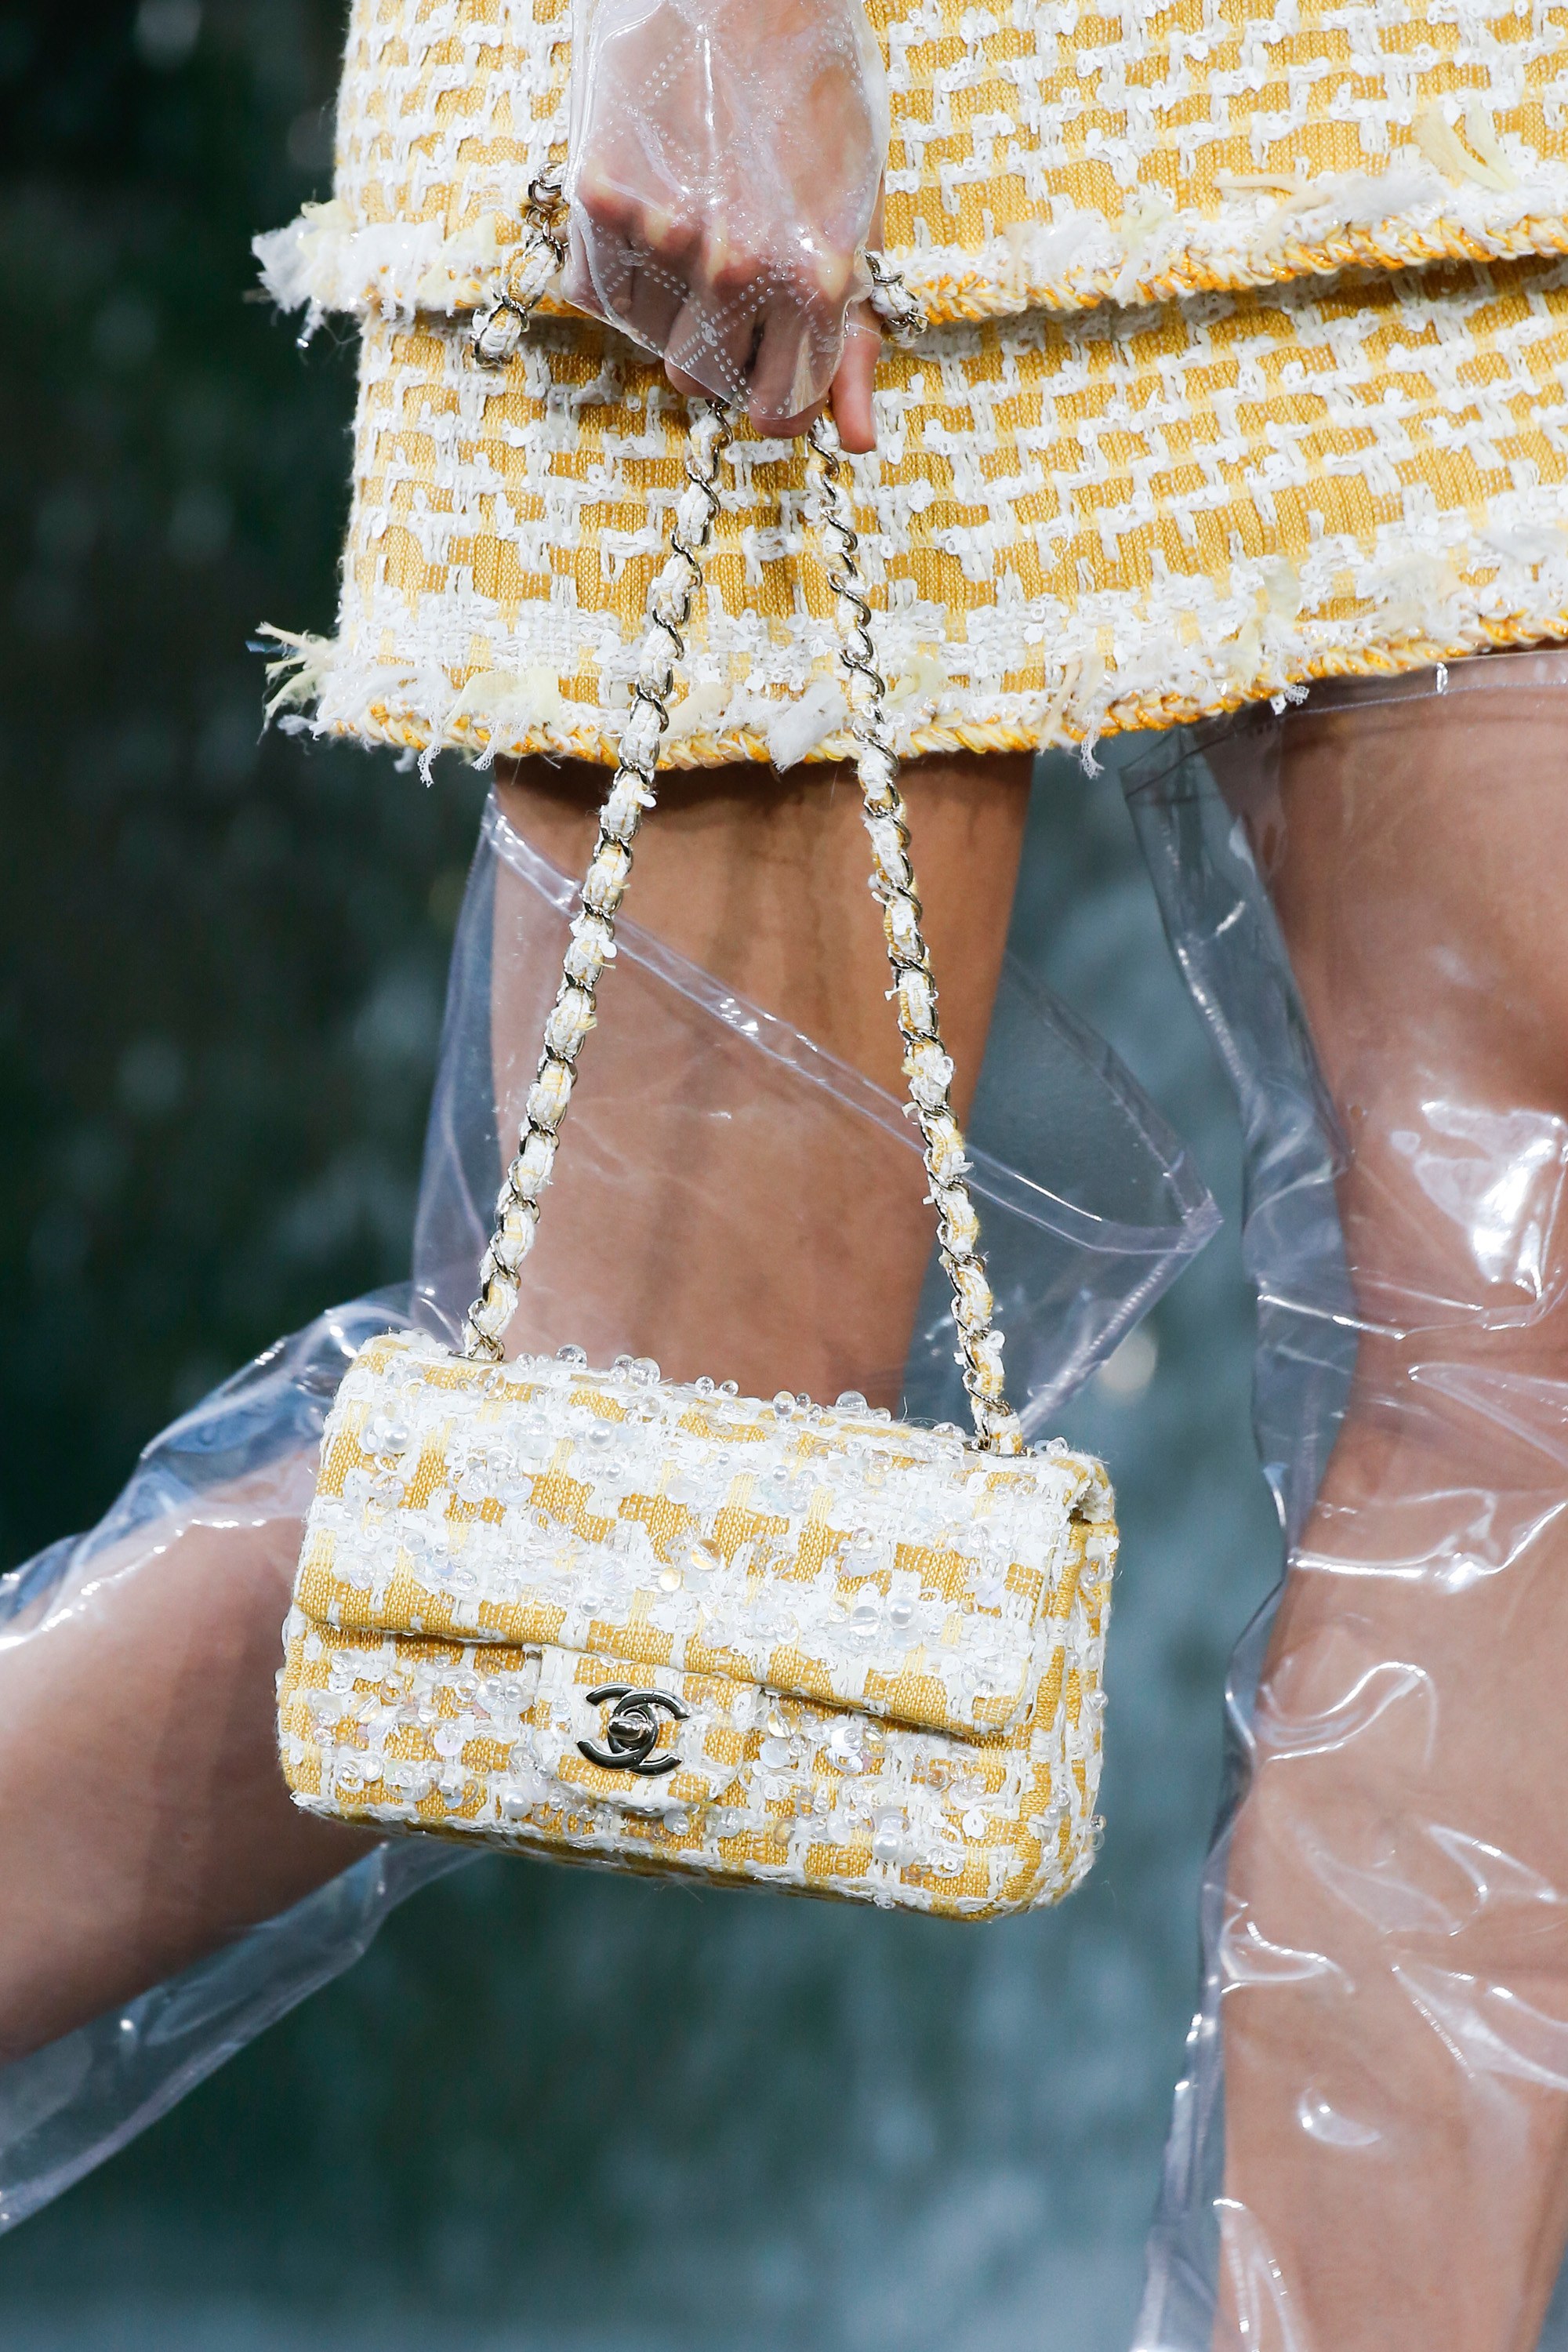 Chanel Turquoise Bags and Shoes for Spring / Summer 2014 - Spotted Fashion